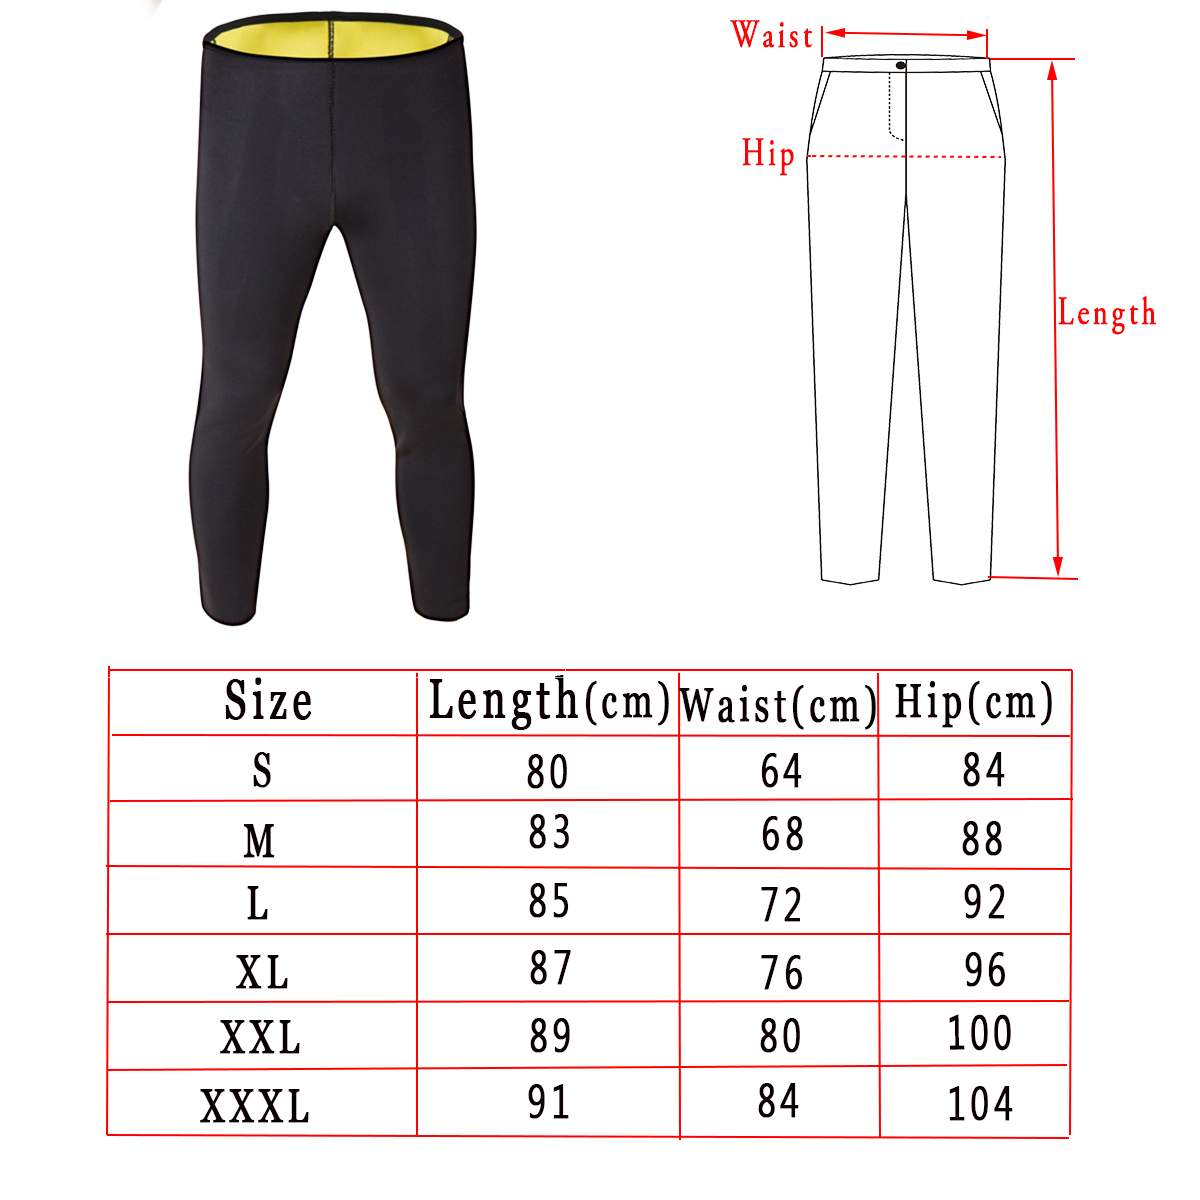 Unisex-Neoprene-Hot-Body-Accelerate-Sweating-Slimming-Fitness-Trousers-Yoga-Sports-Pants-1447219-5